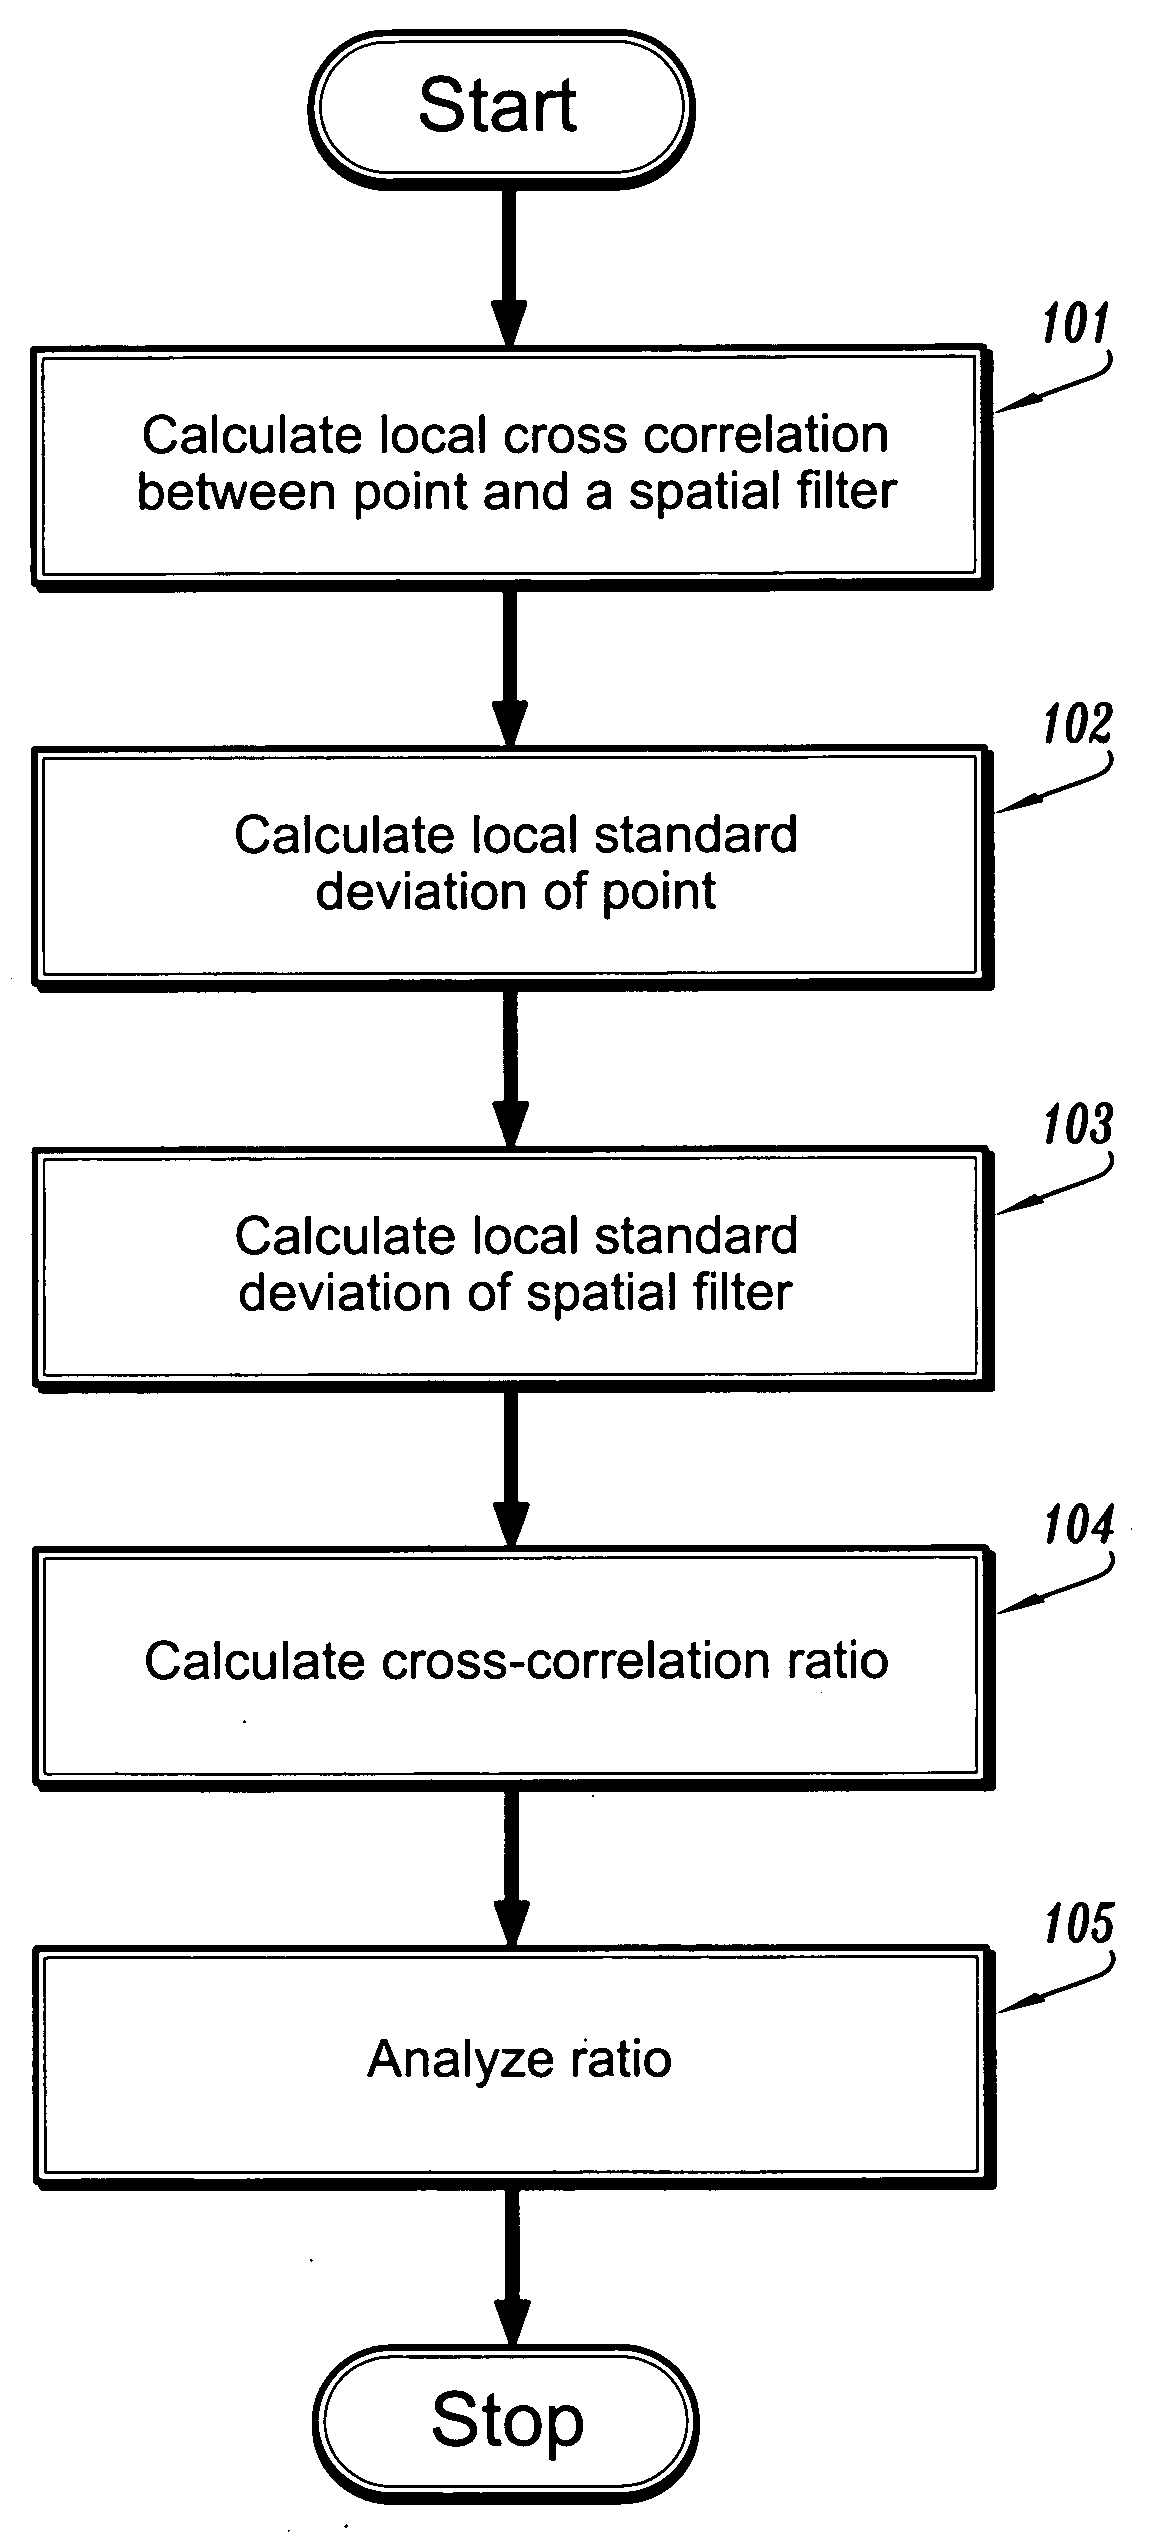 Method and system for fast normalized cross-correlation between an image and a gaussian for detecting spherical structures